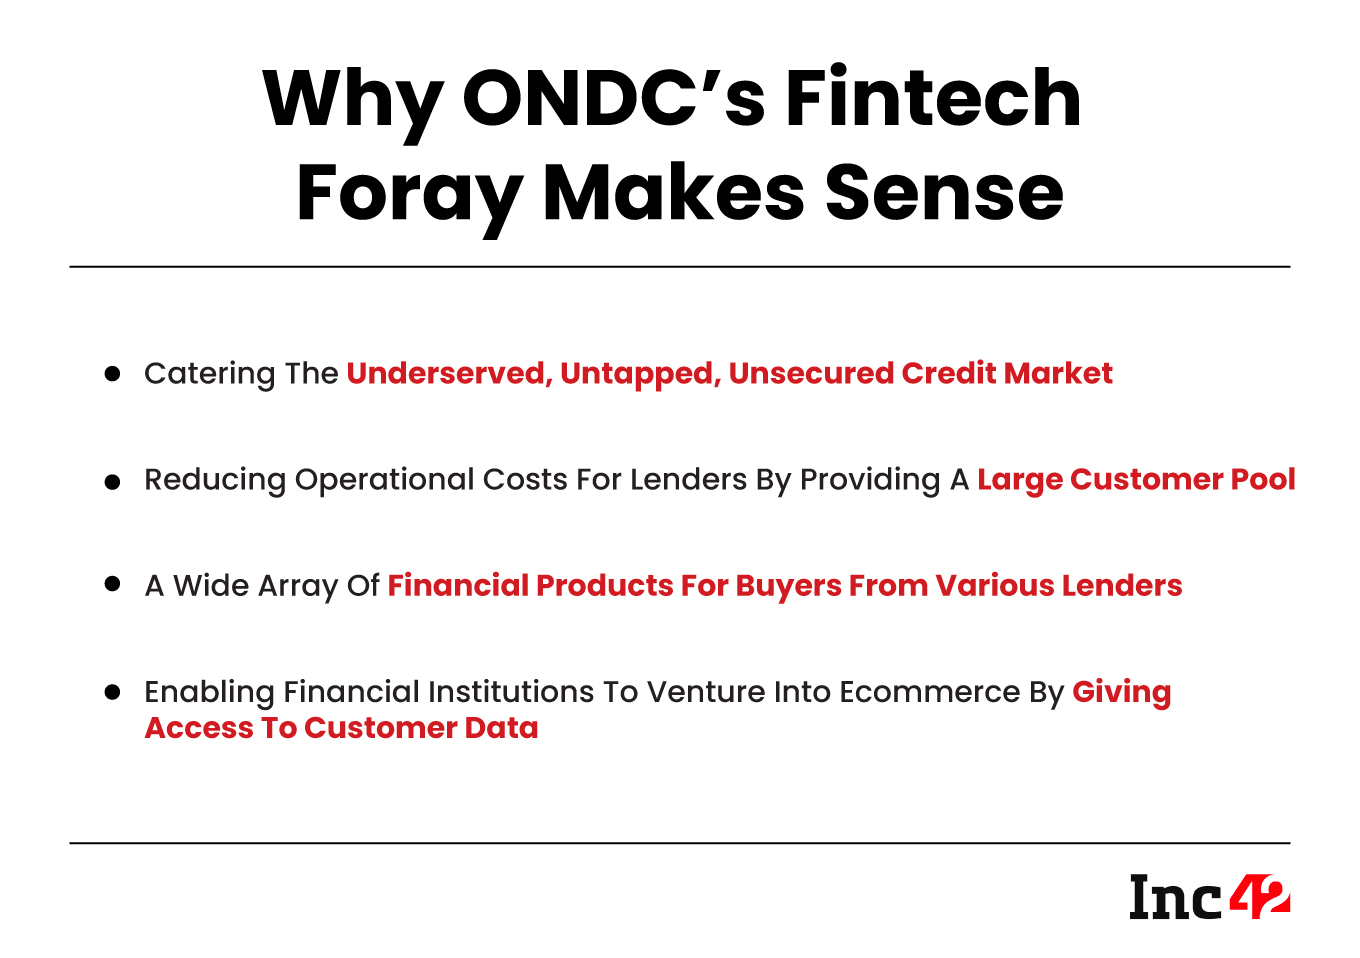 ONDC Financial Services Foray